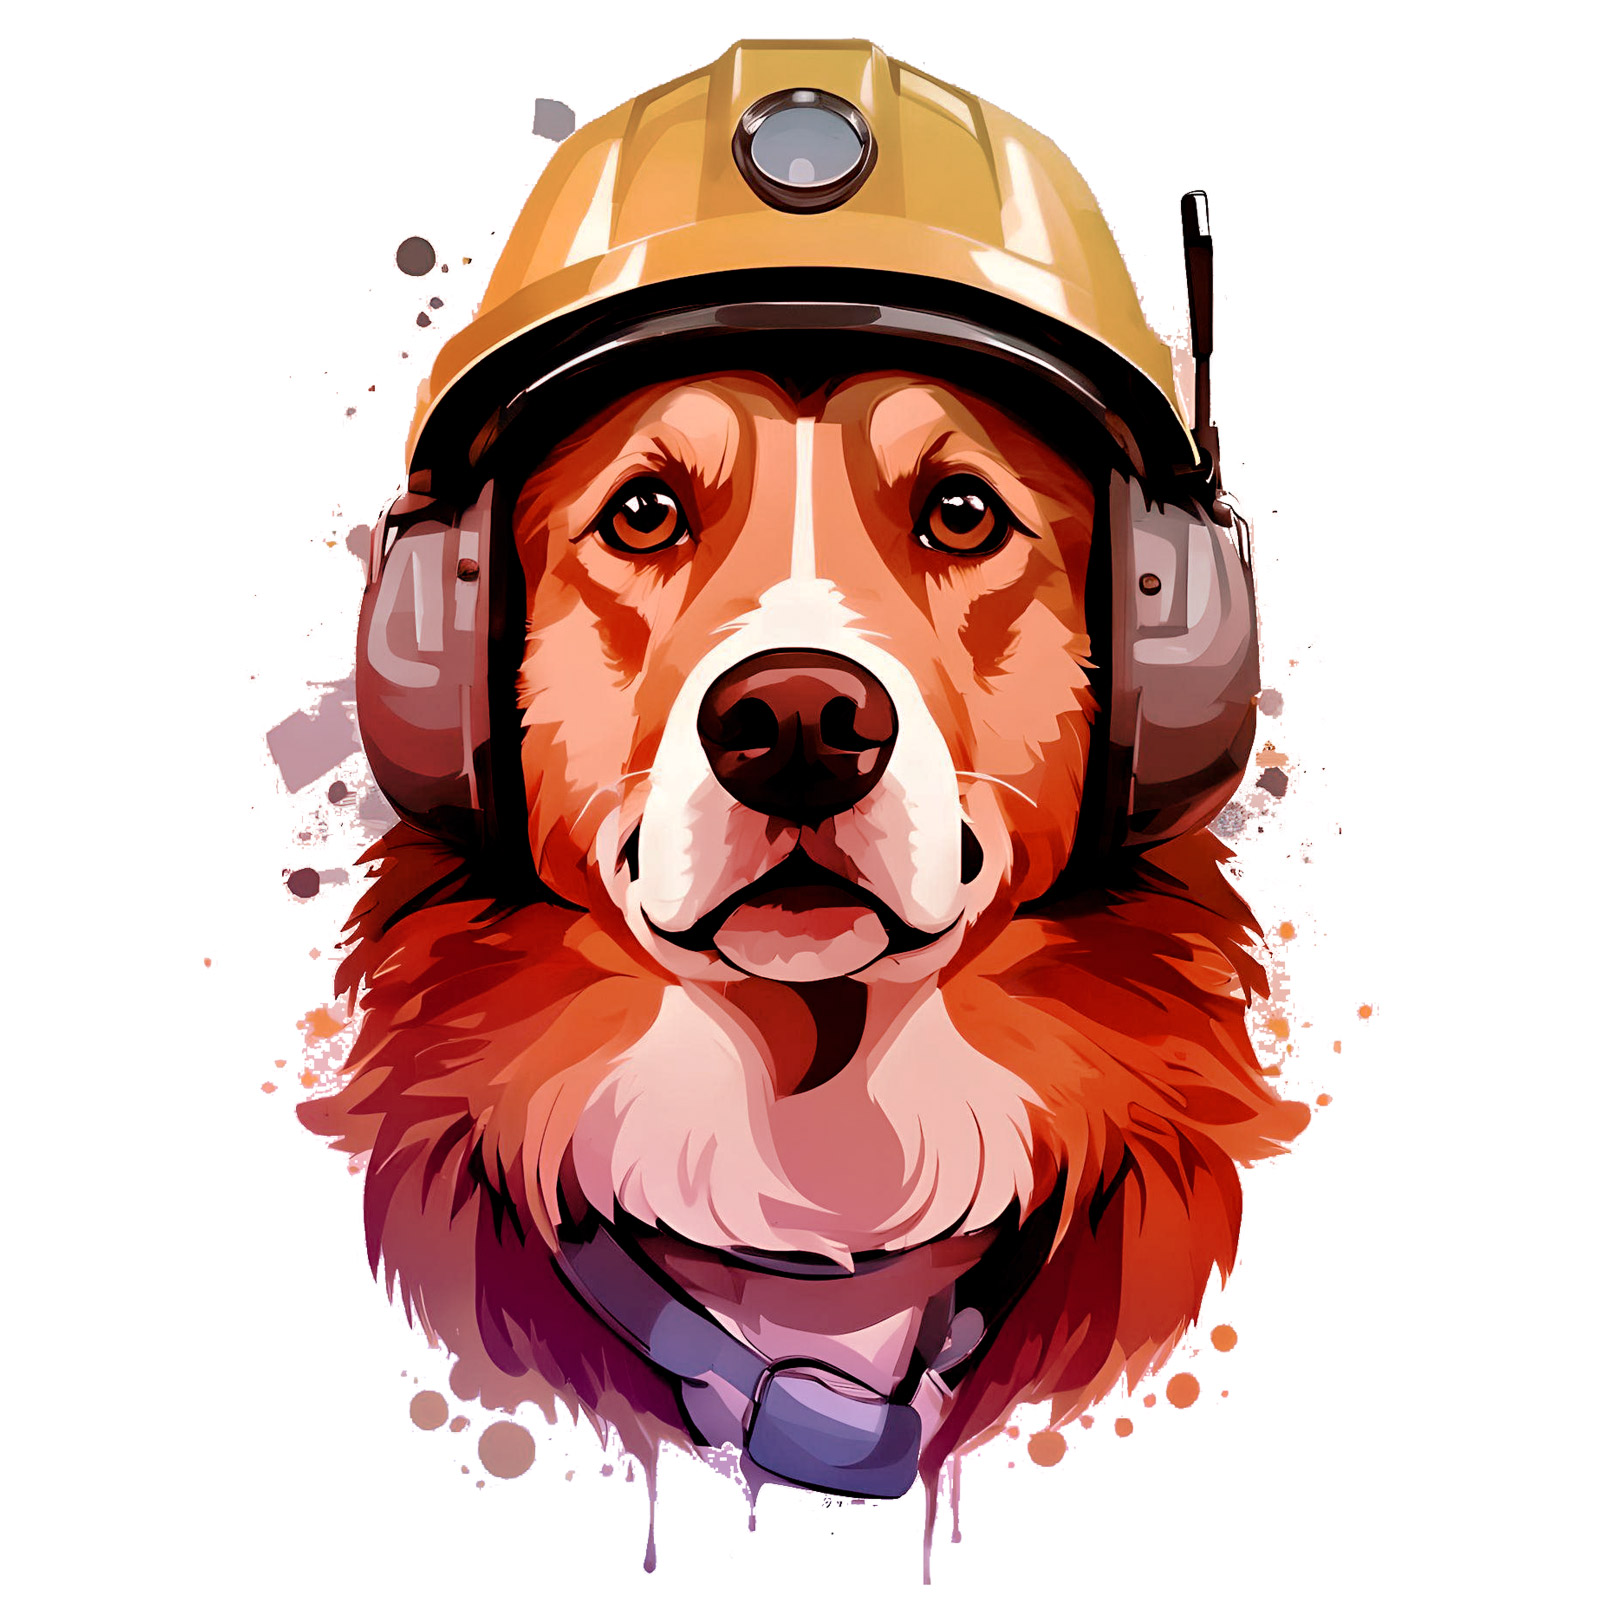 Job scheduling apps for contractors and contractor dogs